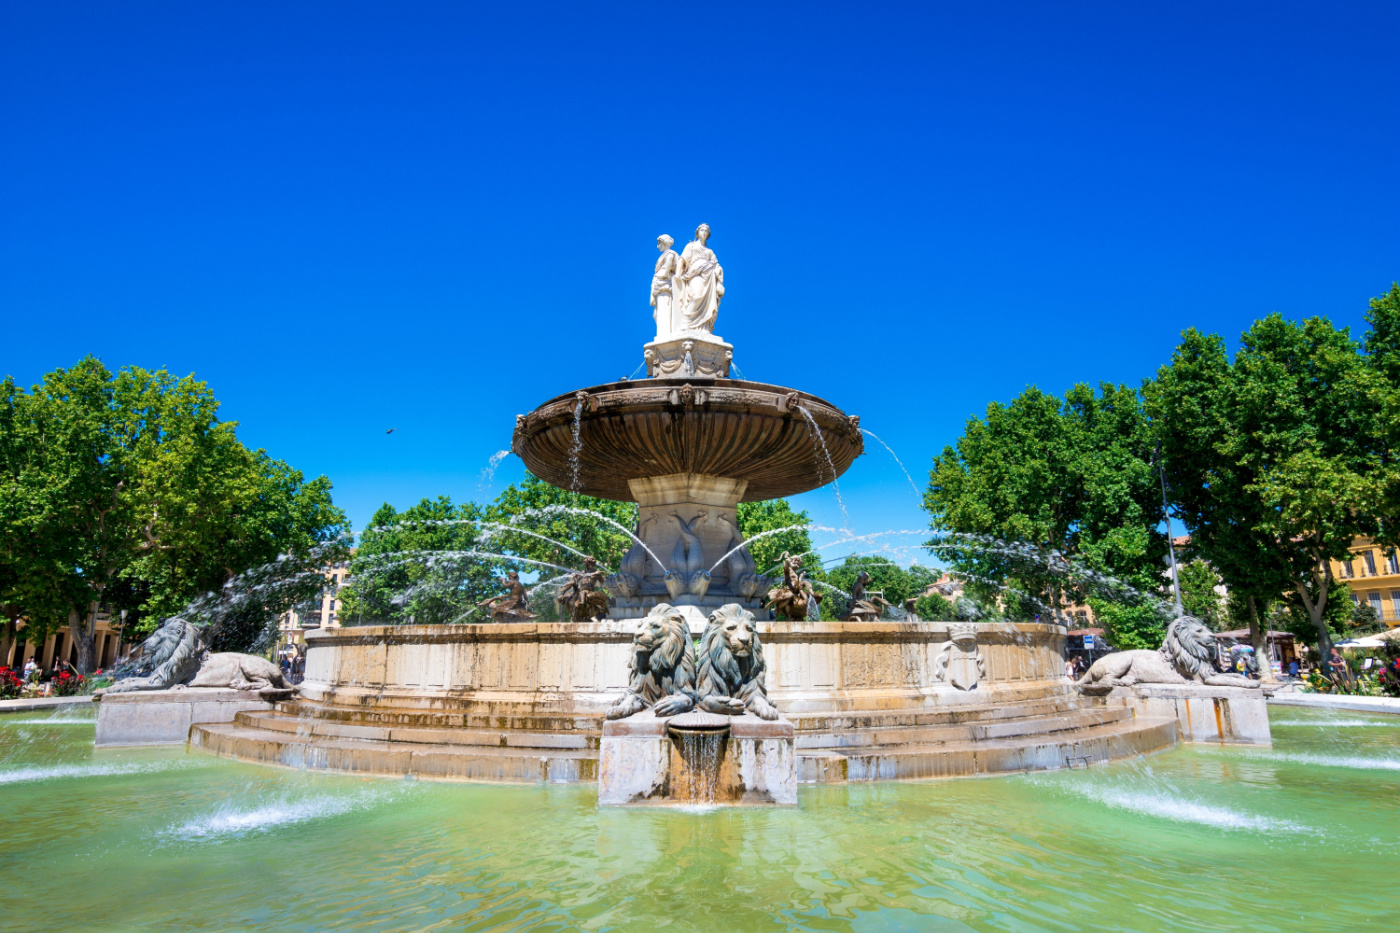 travel south france itinerary